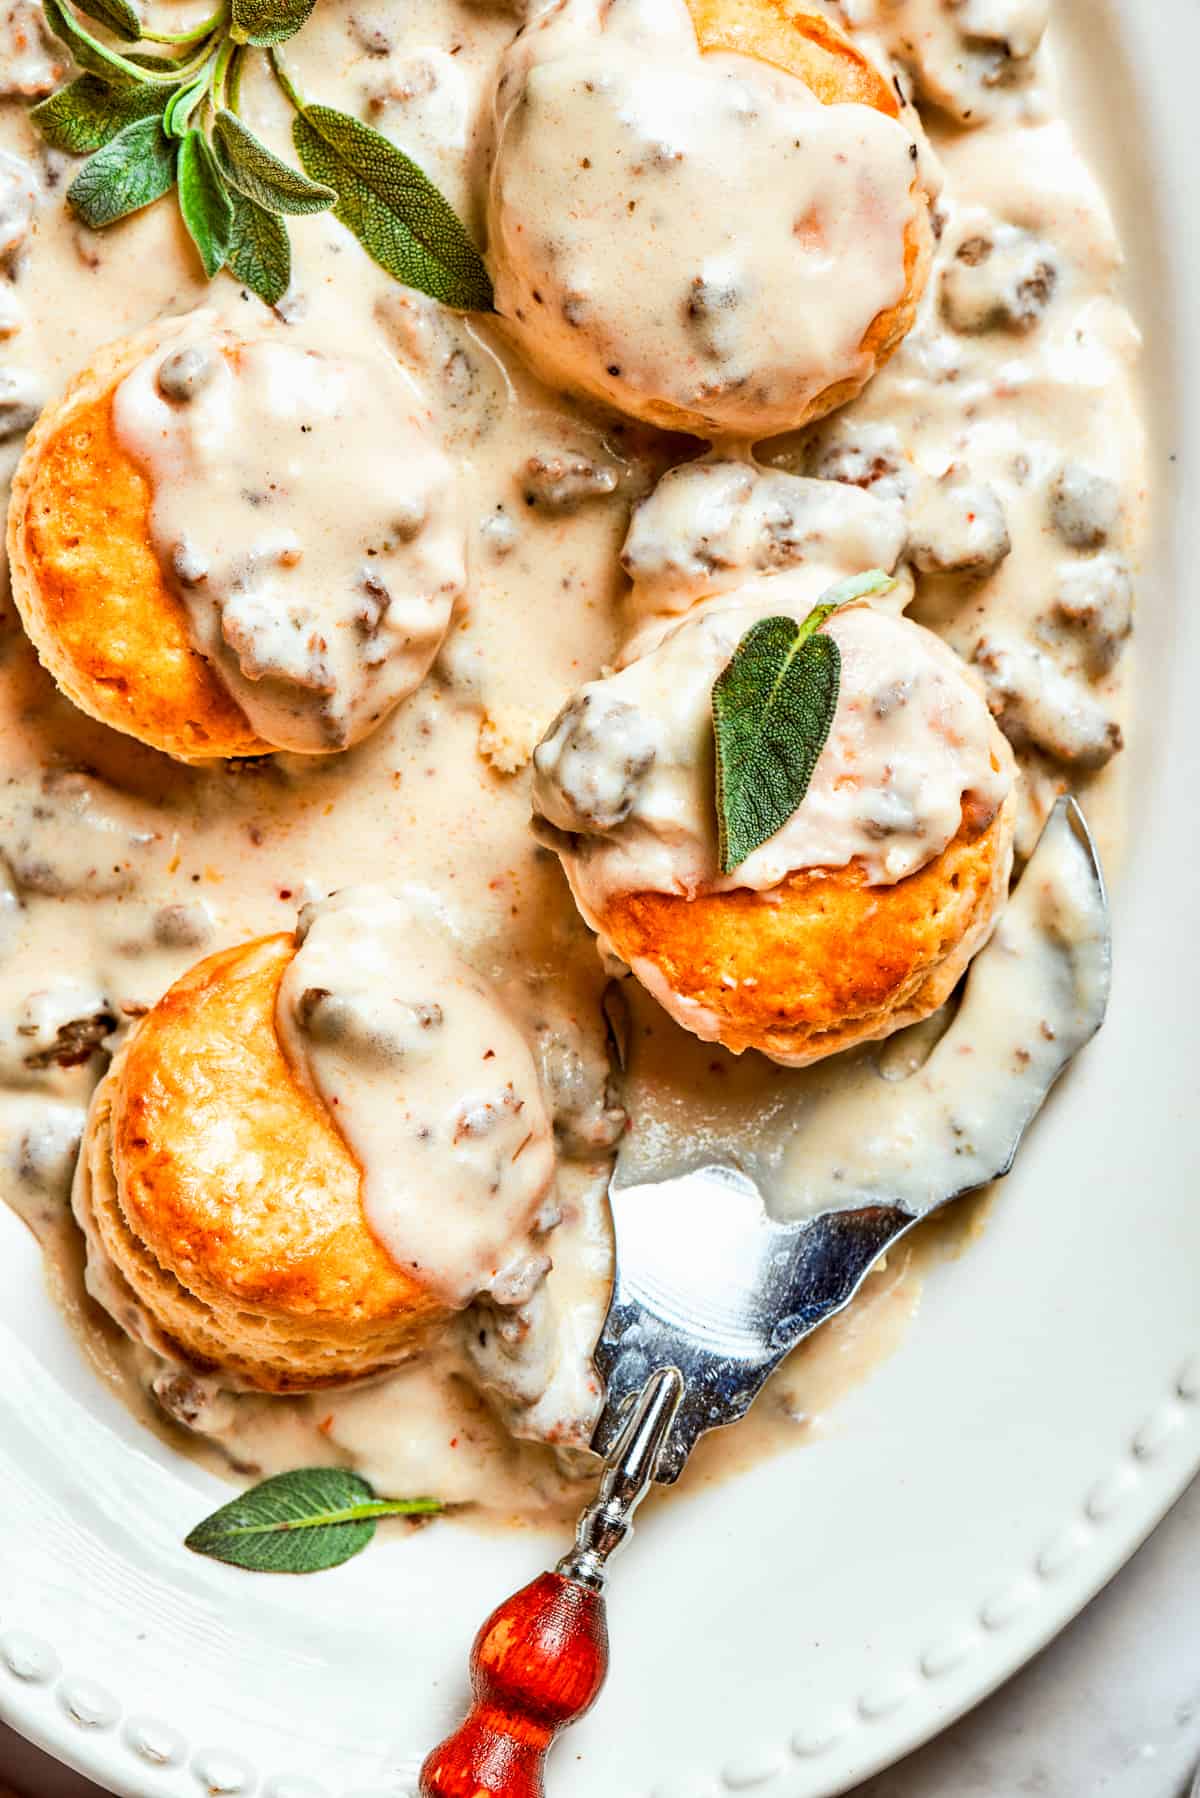 Sausage and gravy biscuits served on an oval white serving dish.